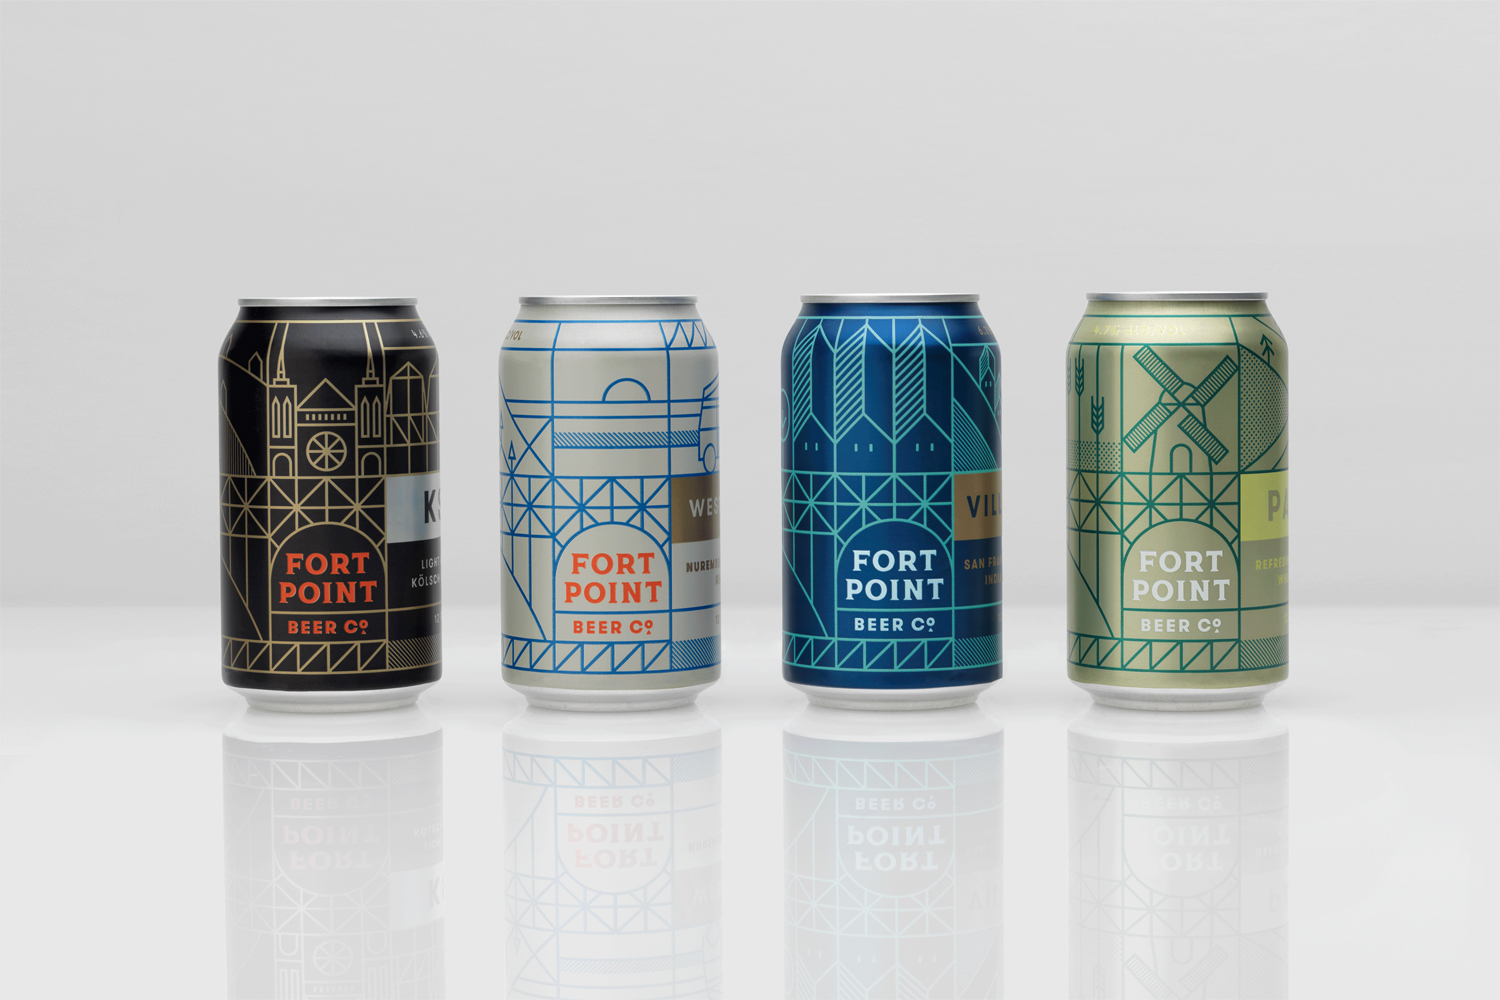 Illustration in Branding – Fort Point Beer Co. by Manual, United States